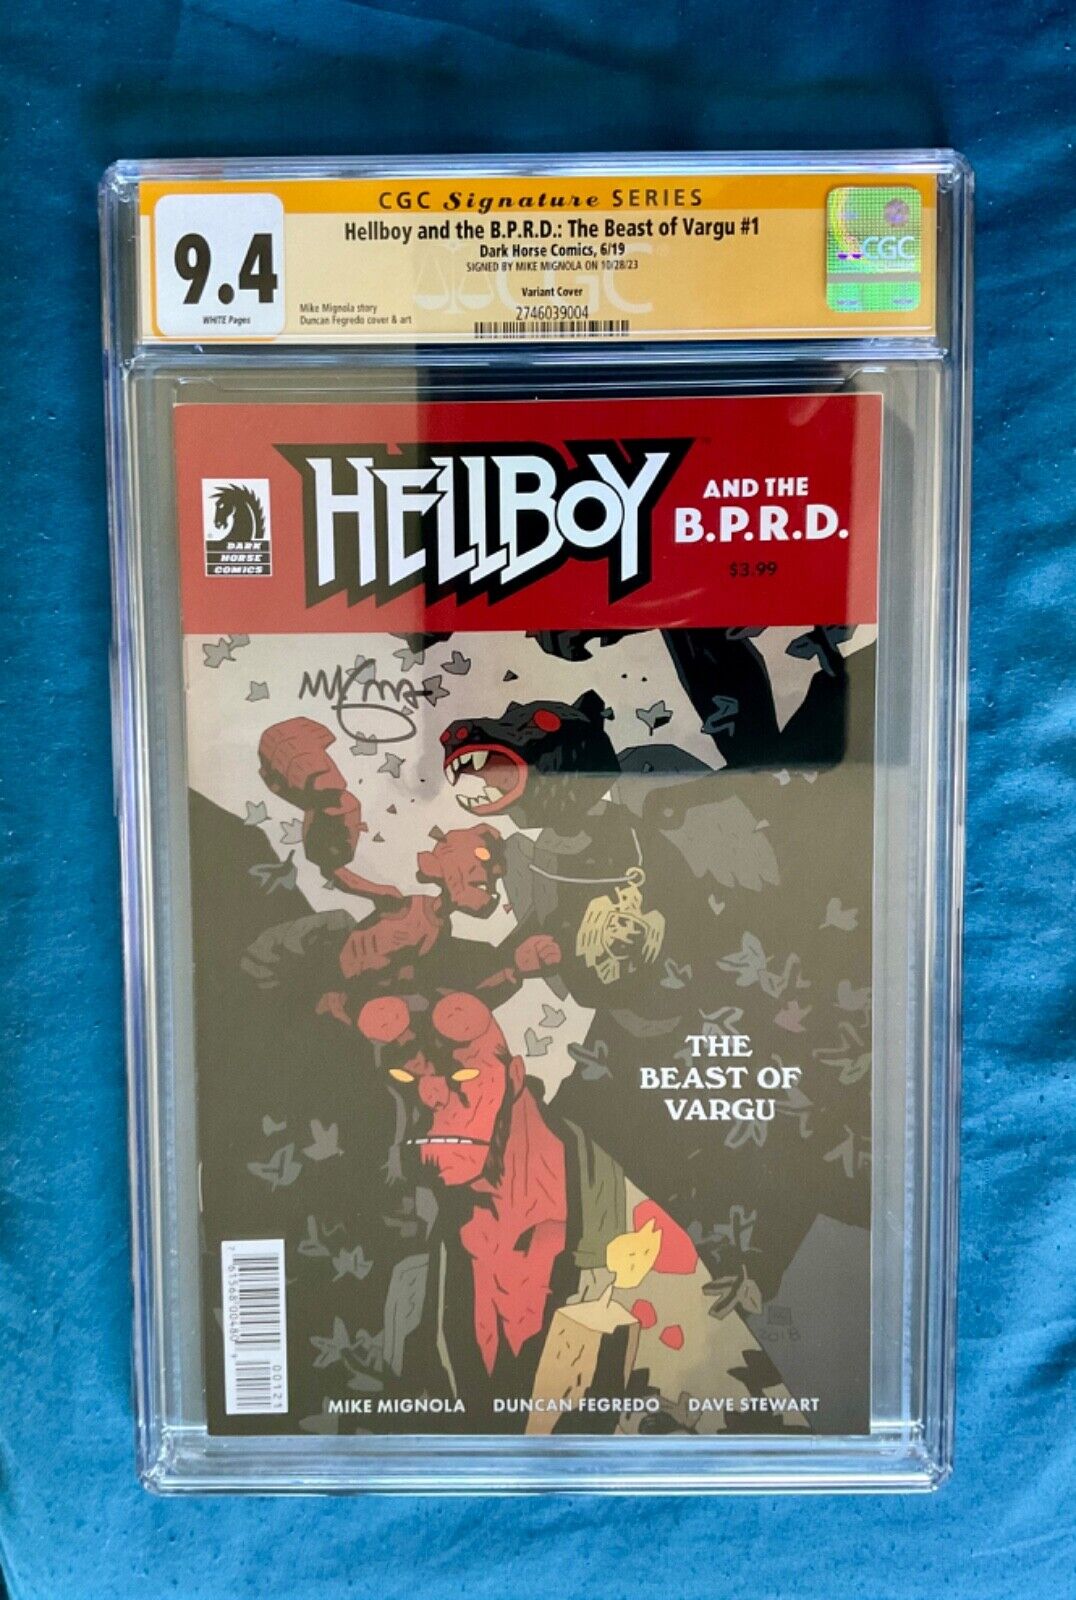 Signed MIKE MIGNOLA 9.4 CGC Hellboy and the B.P.R.D. # 1 autographed ss batman 2